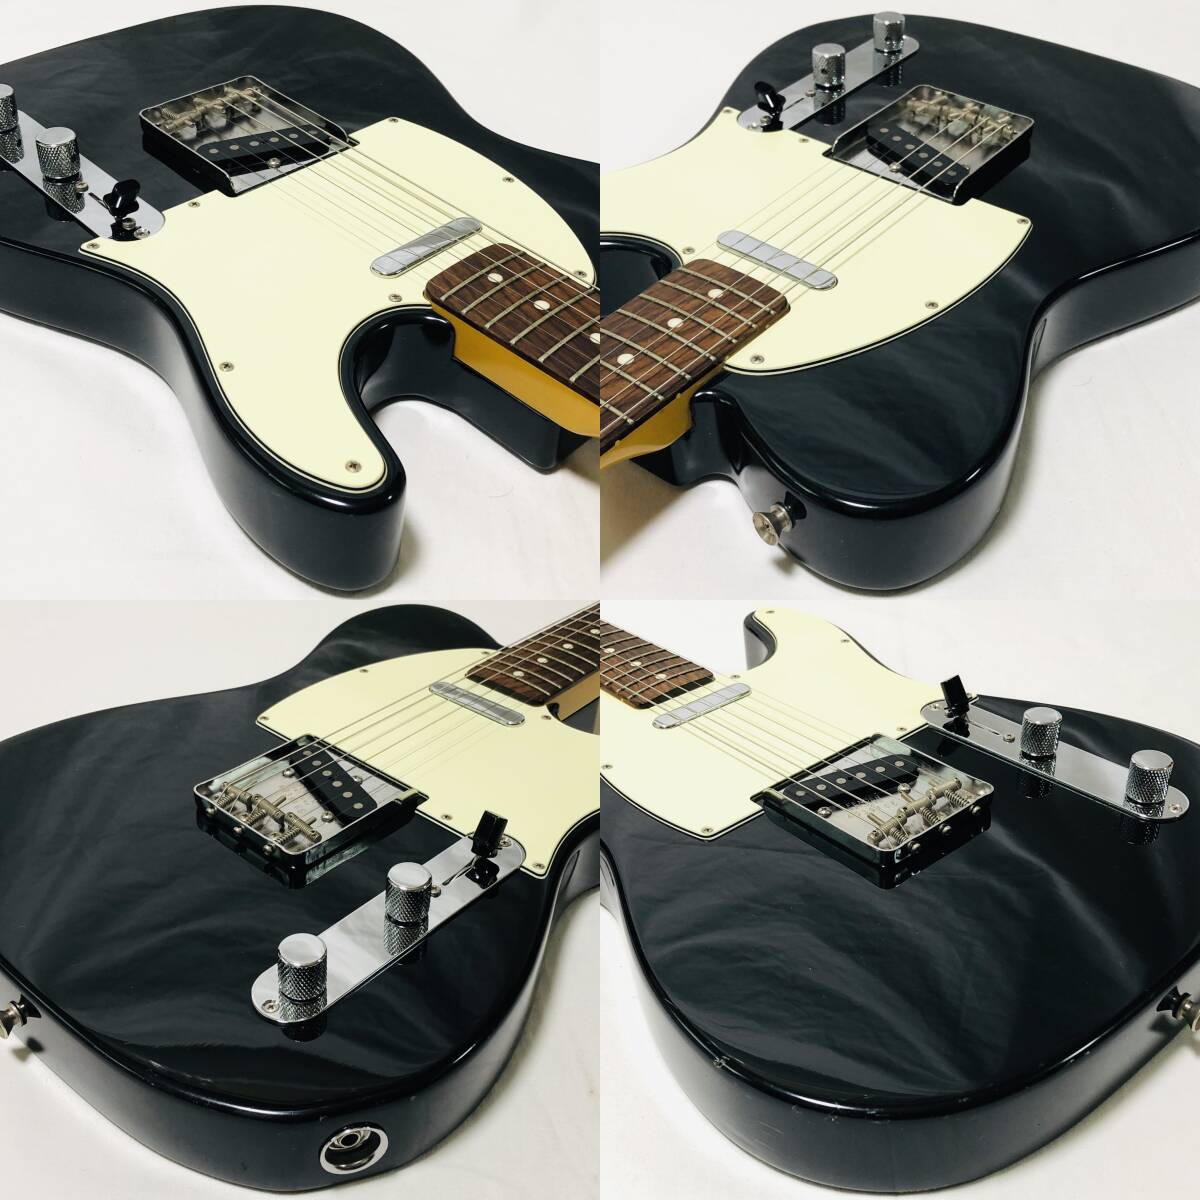 Fender Telecaster TL62-US BLK Crafted in Japan フェンダー テレキャスター 1962年モデル ブラックの画像5